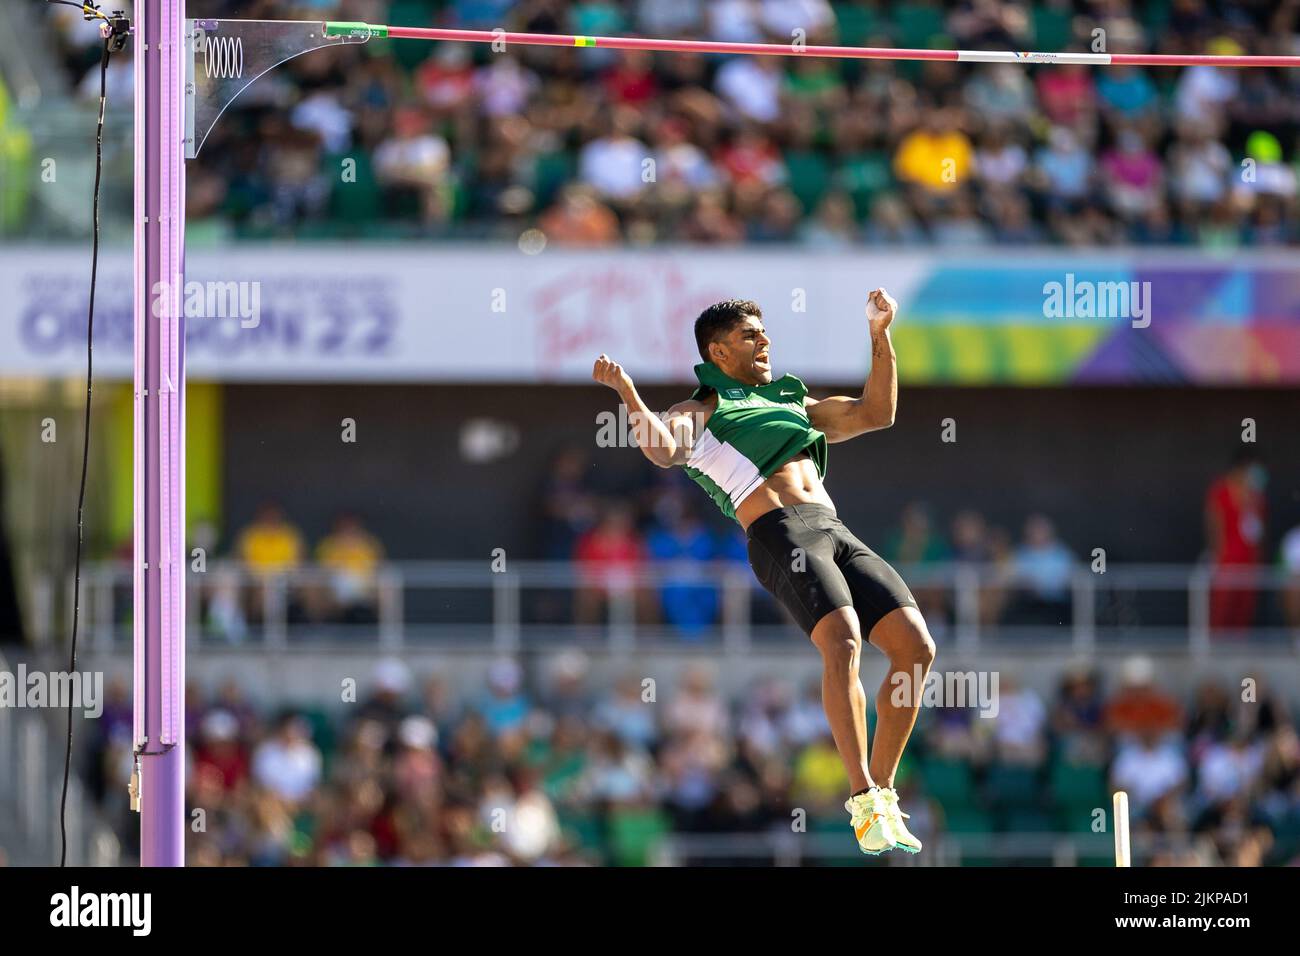 Hussein Assem Al Hizam (KSA) clears a season best of 18-6 1/2 (5.65) in the pole vault qualifying round during the afternoon session on day 8 of the W Stock Photo